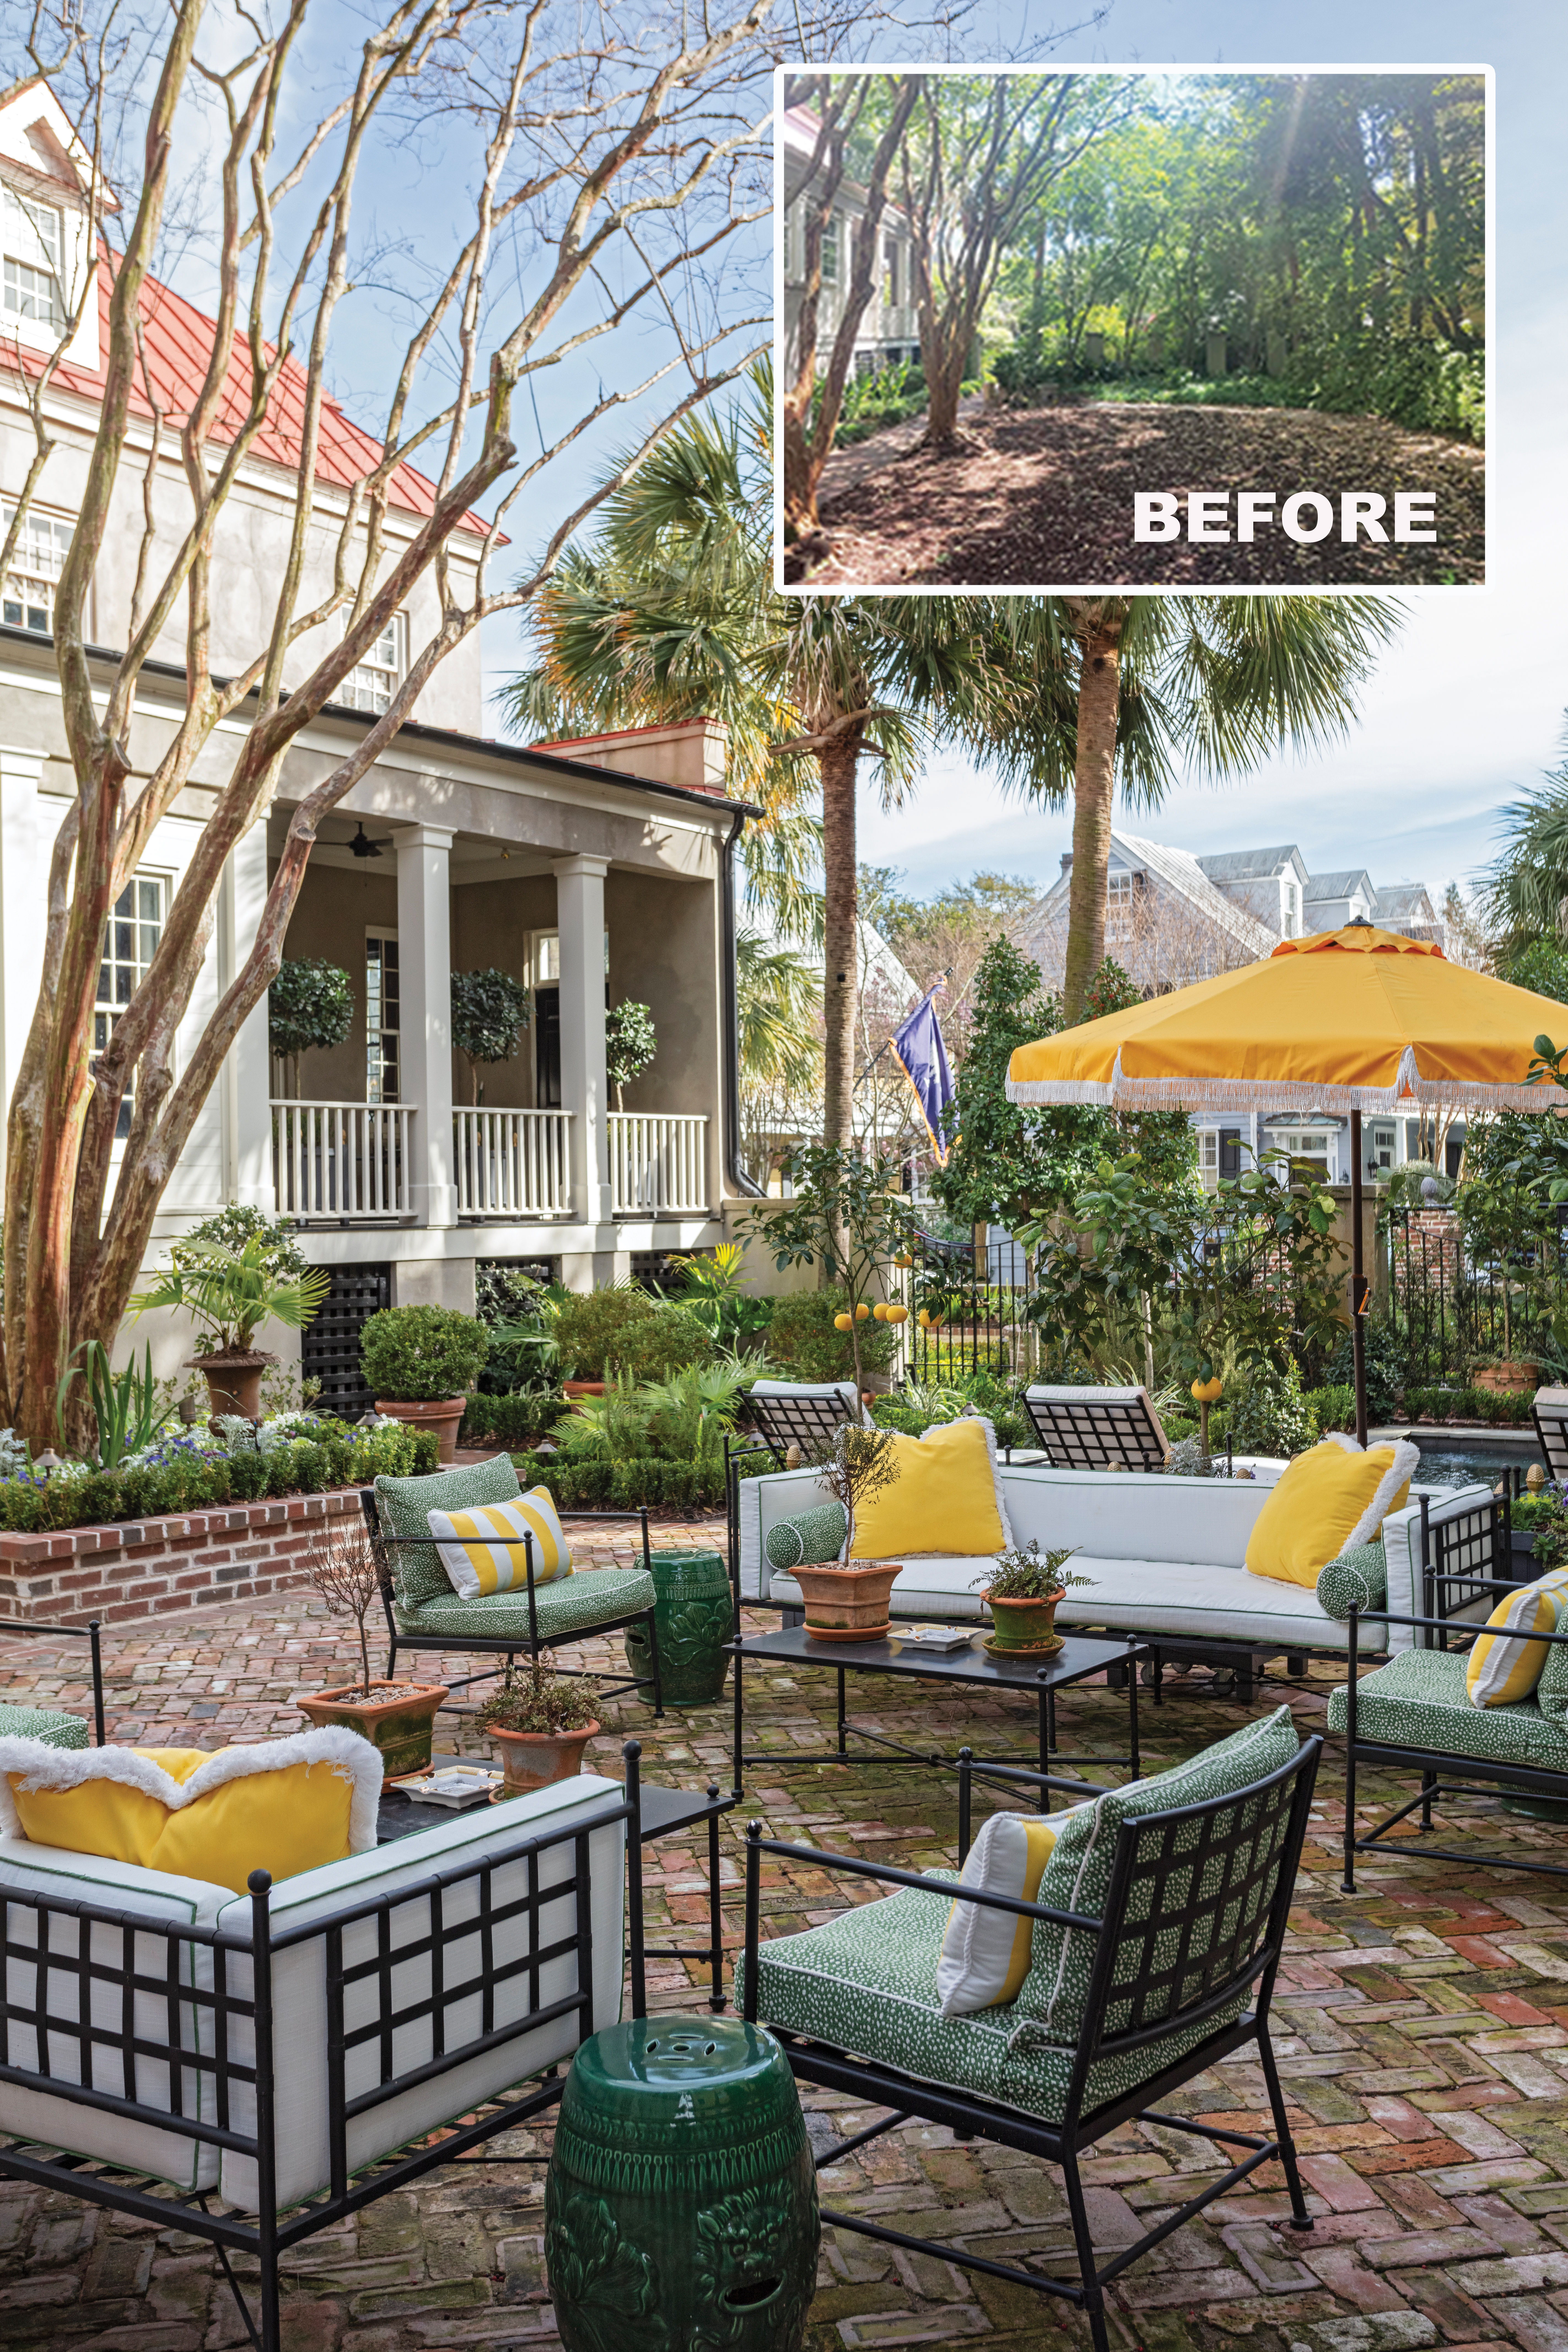 The Hardees reimagined the overgrown side yard as an entertaining space with formal garden beds, a large brick patio, and a pool designed to look like a reflecting pond.